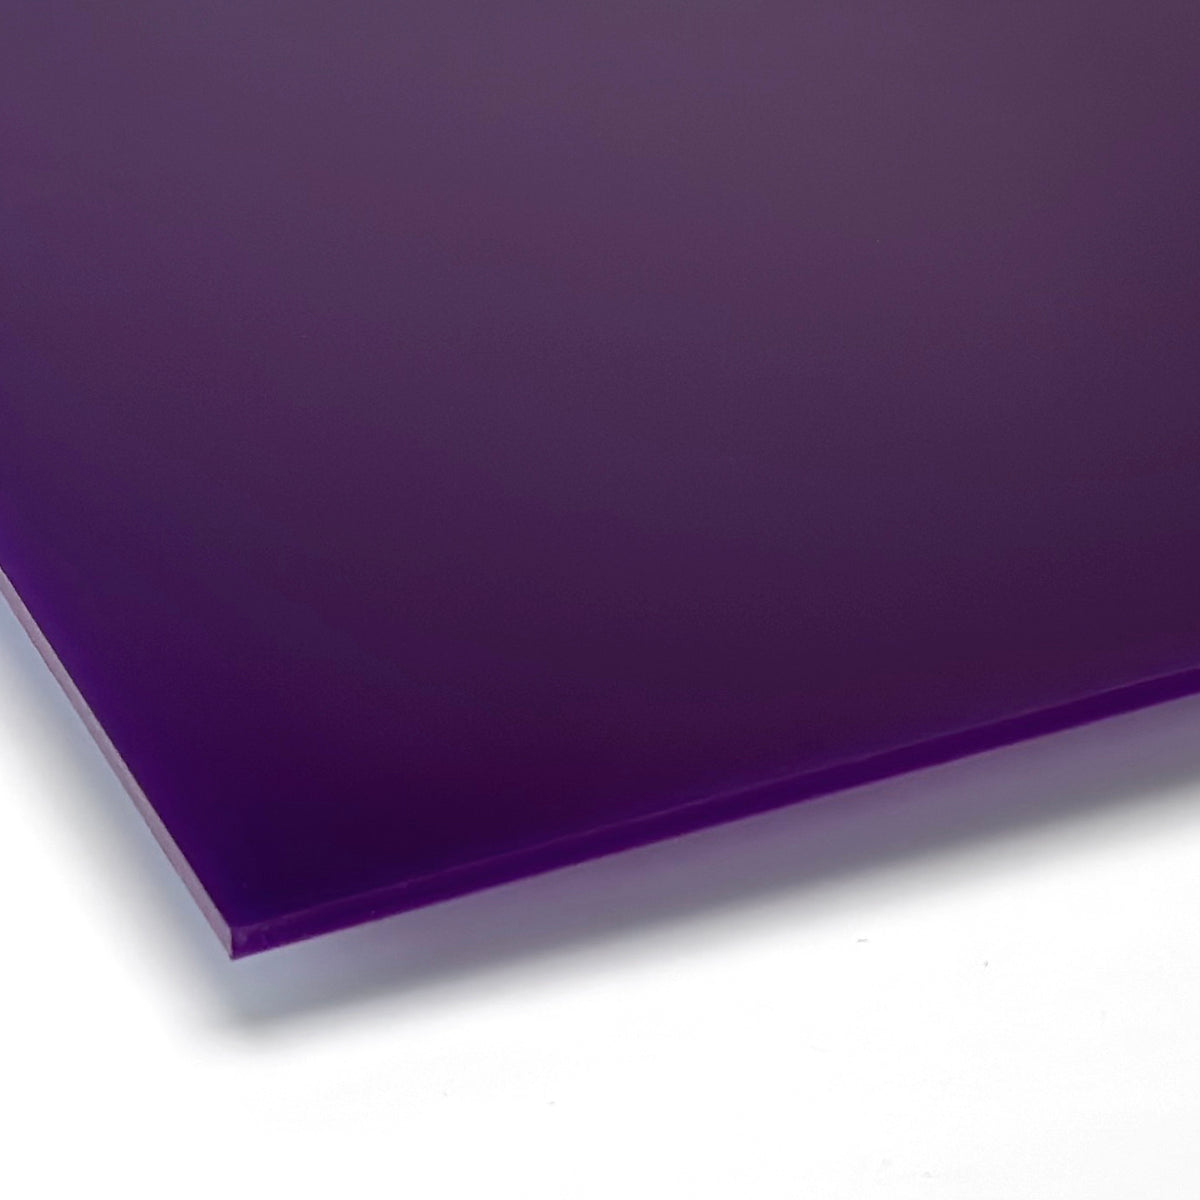 Purple Acrylic with laser cutting & Printing - 600x400mm